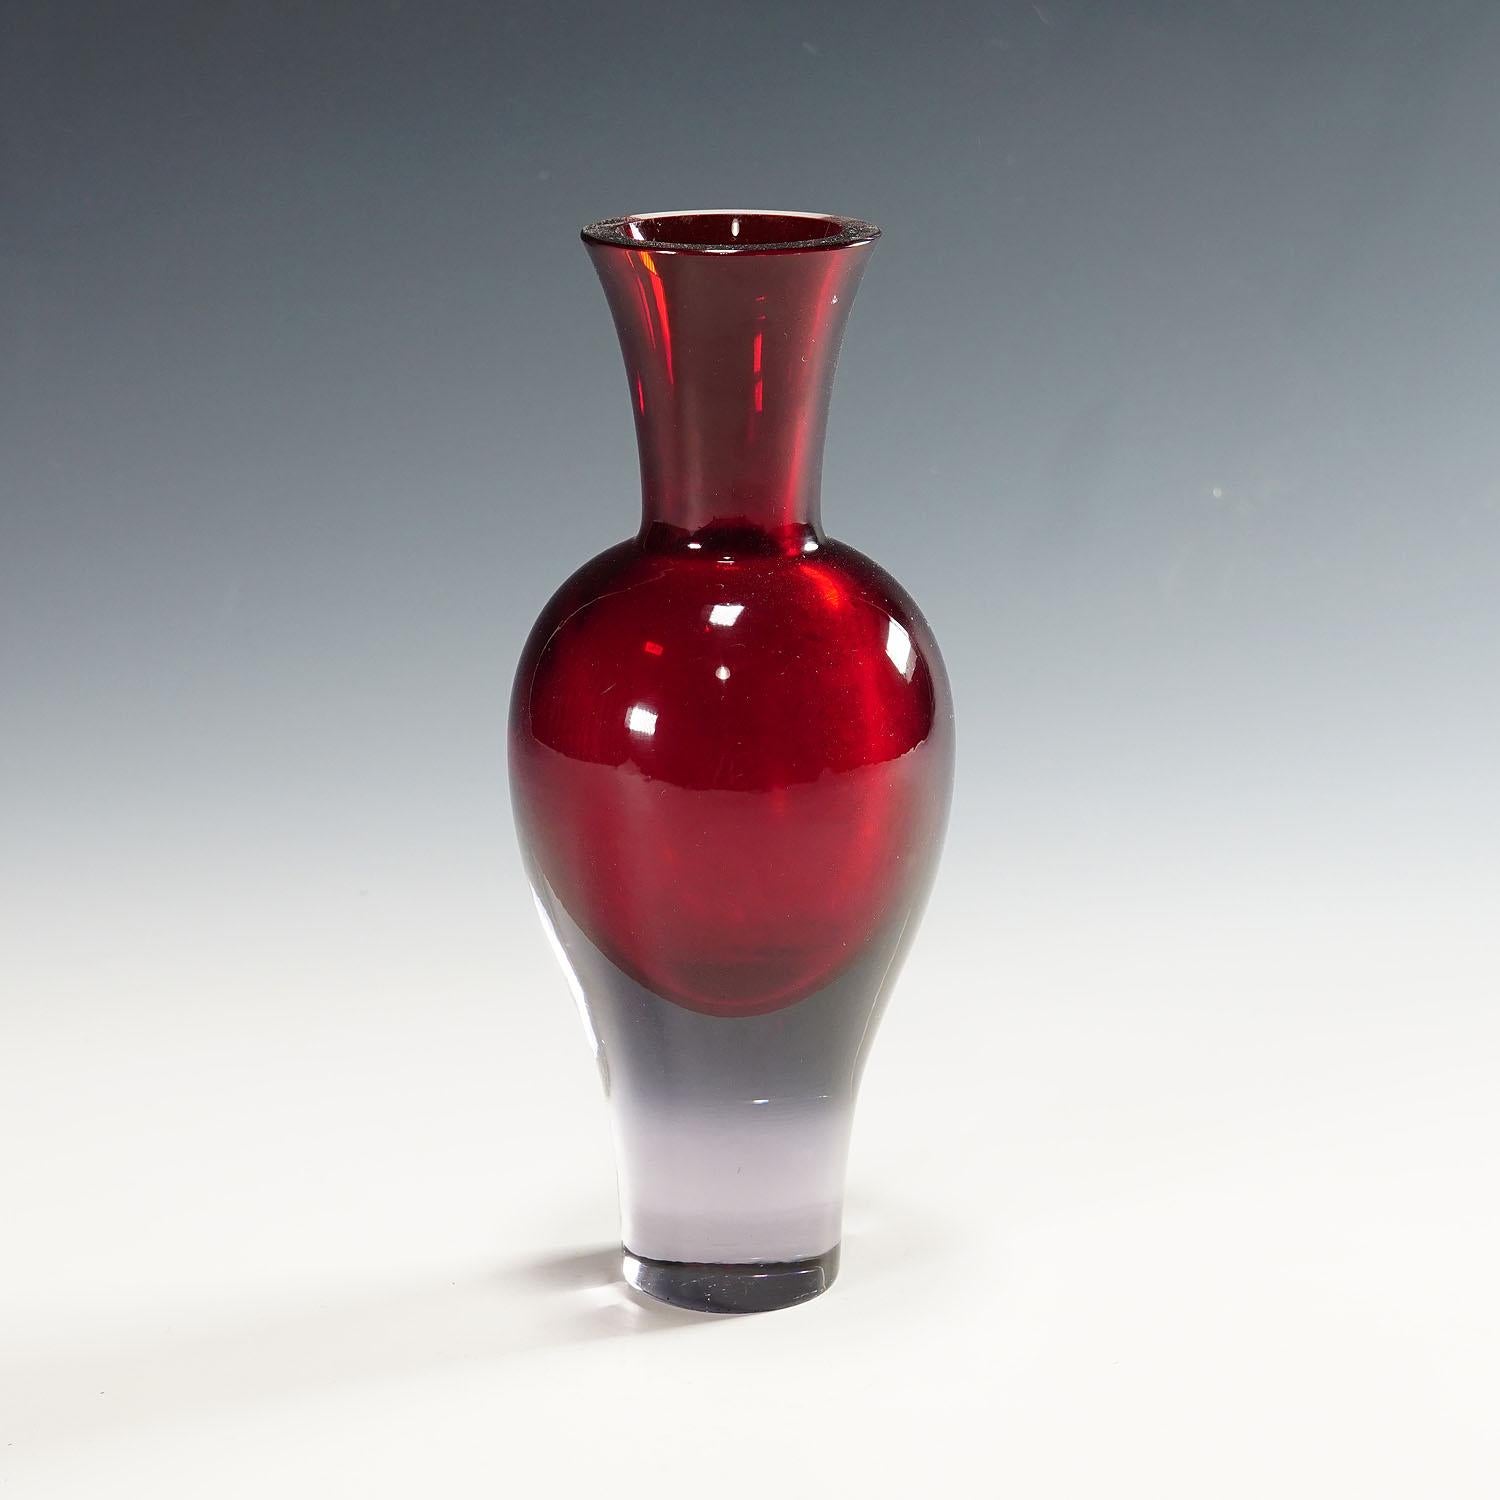 Seguso Vetri d'Arte Murano Sommerso Glass Vase, 1960s.

A vintage Murano sommerso art glass vase. Designed by Flavio Poli and manufactured by Seguso Vetri d'Arte circa 1960s. Manufactured in thick violet glass with a ruby red inlay. A rare design of